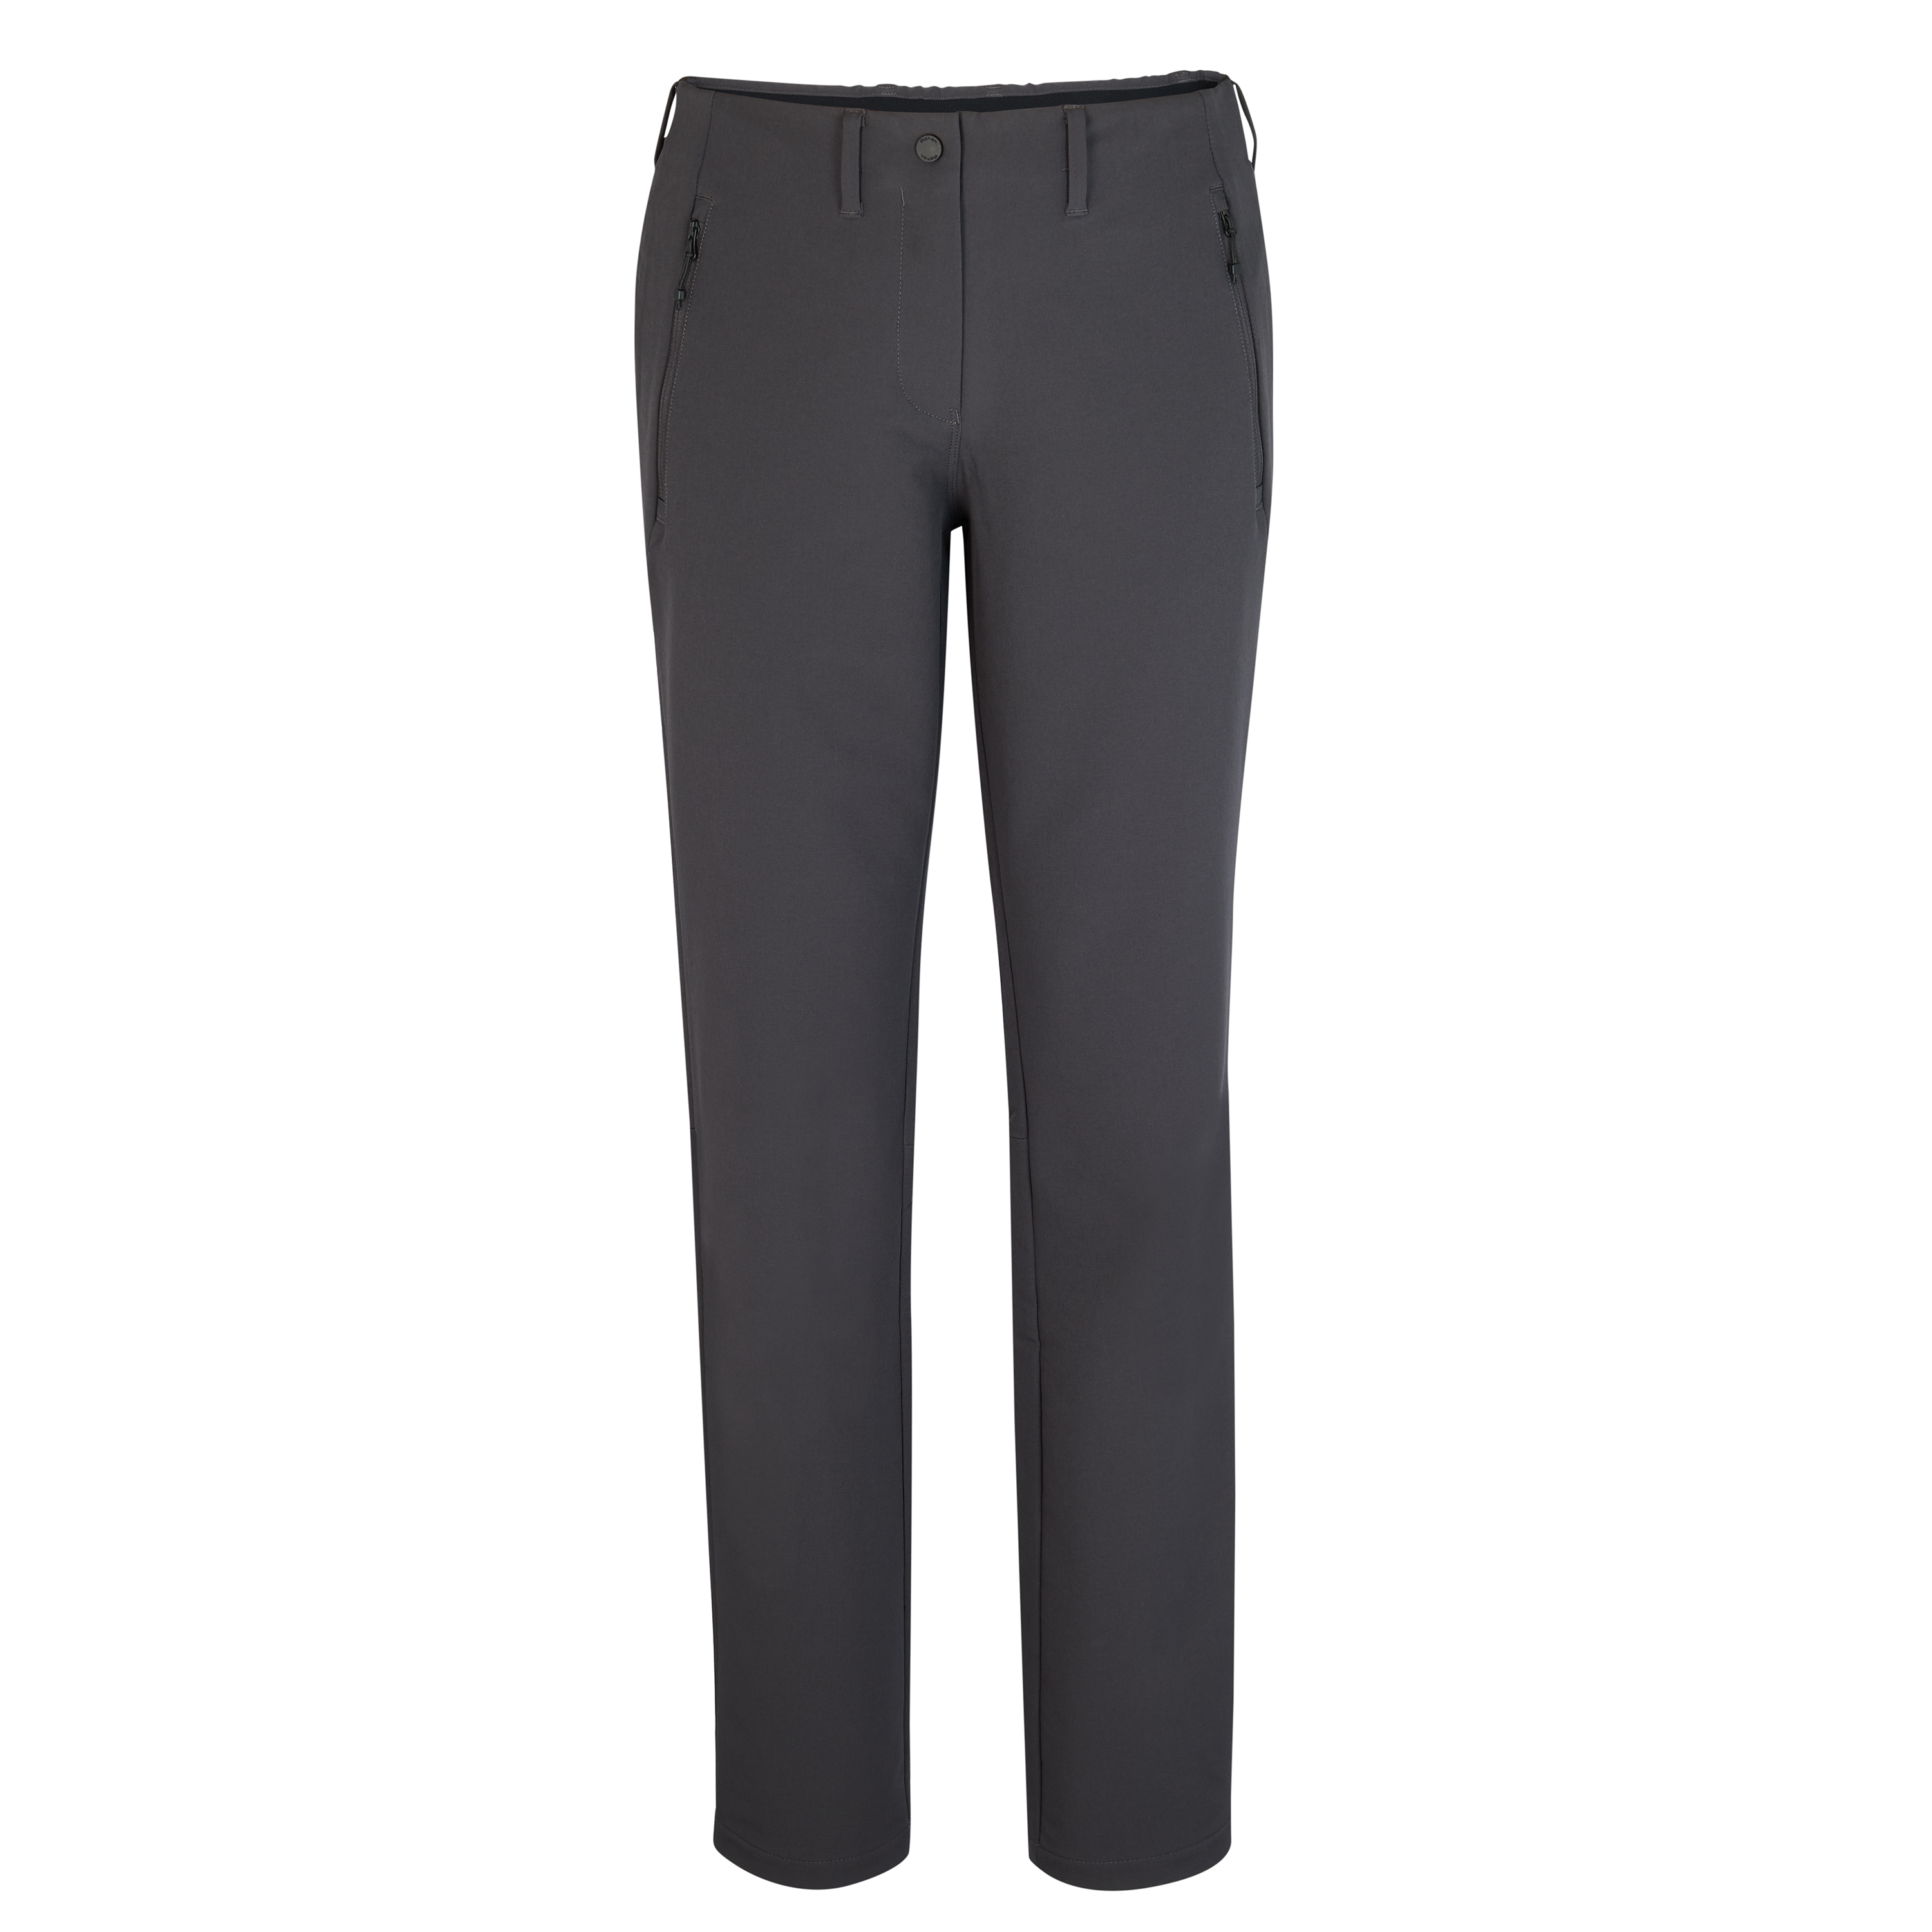 Women’s Striders Hiking Trousers